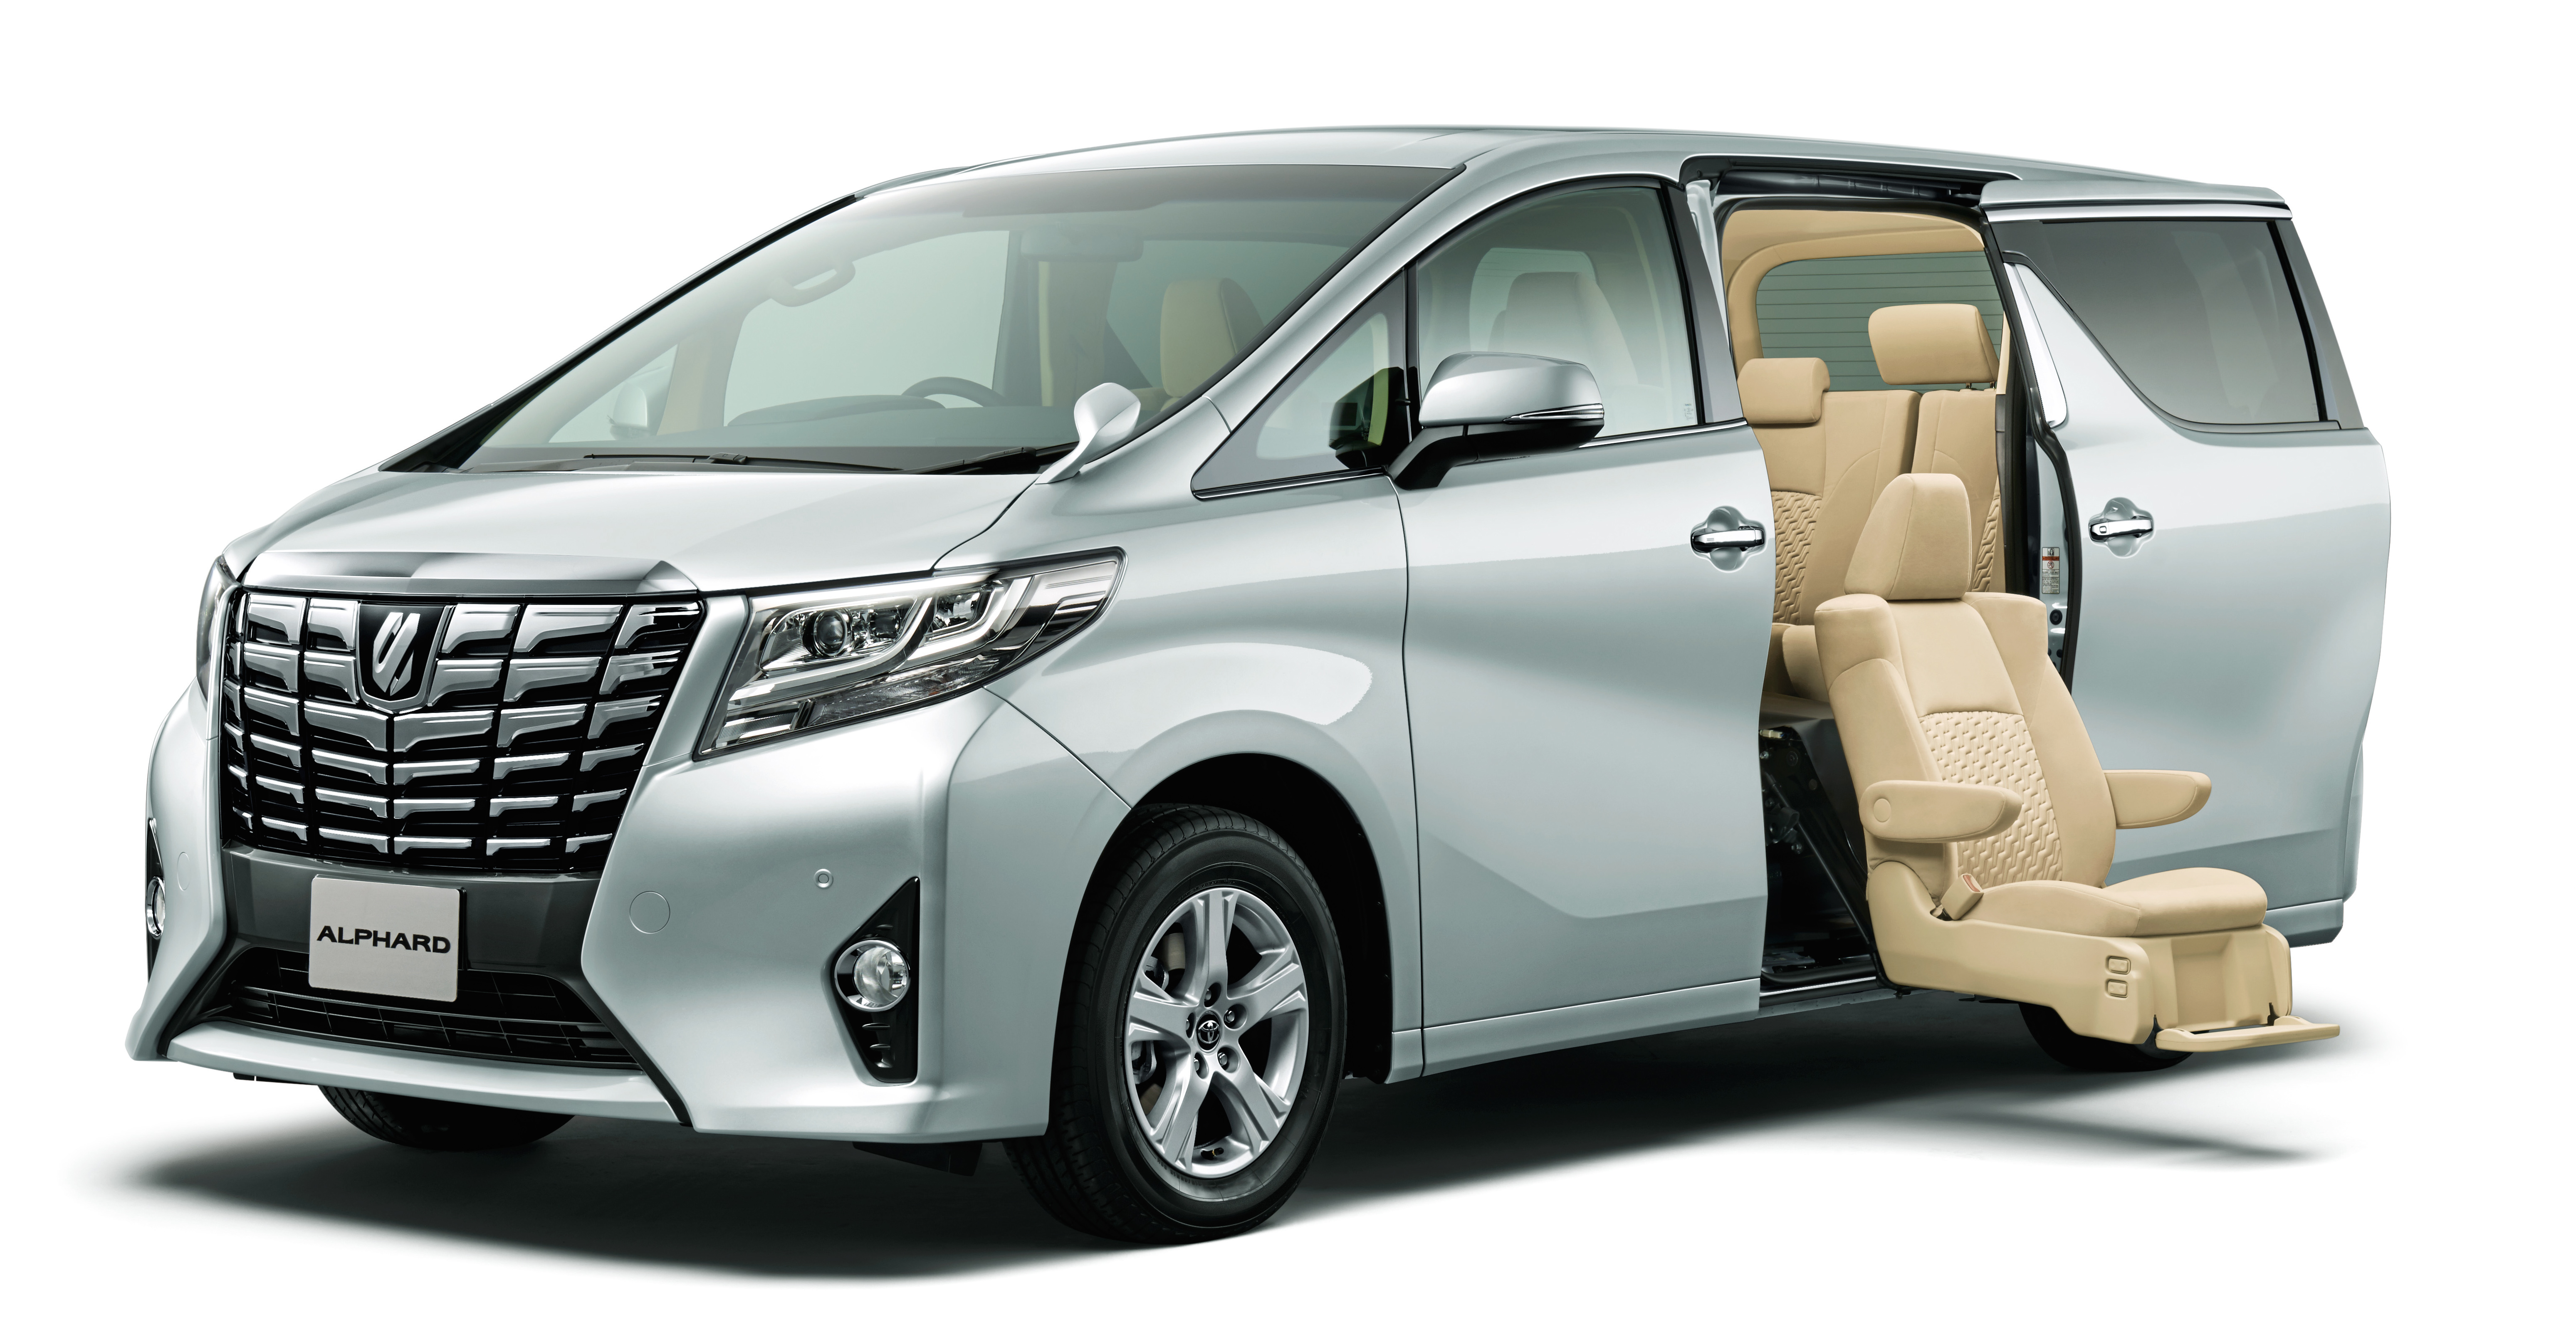 Toyota Alphard best specifications